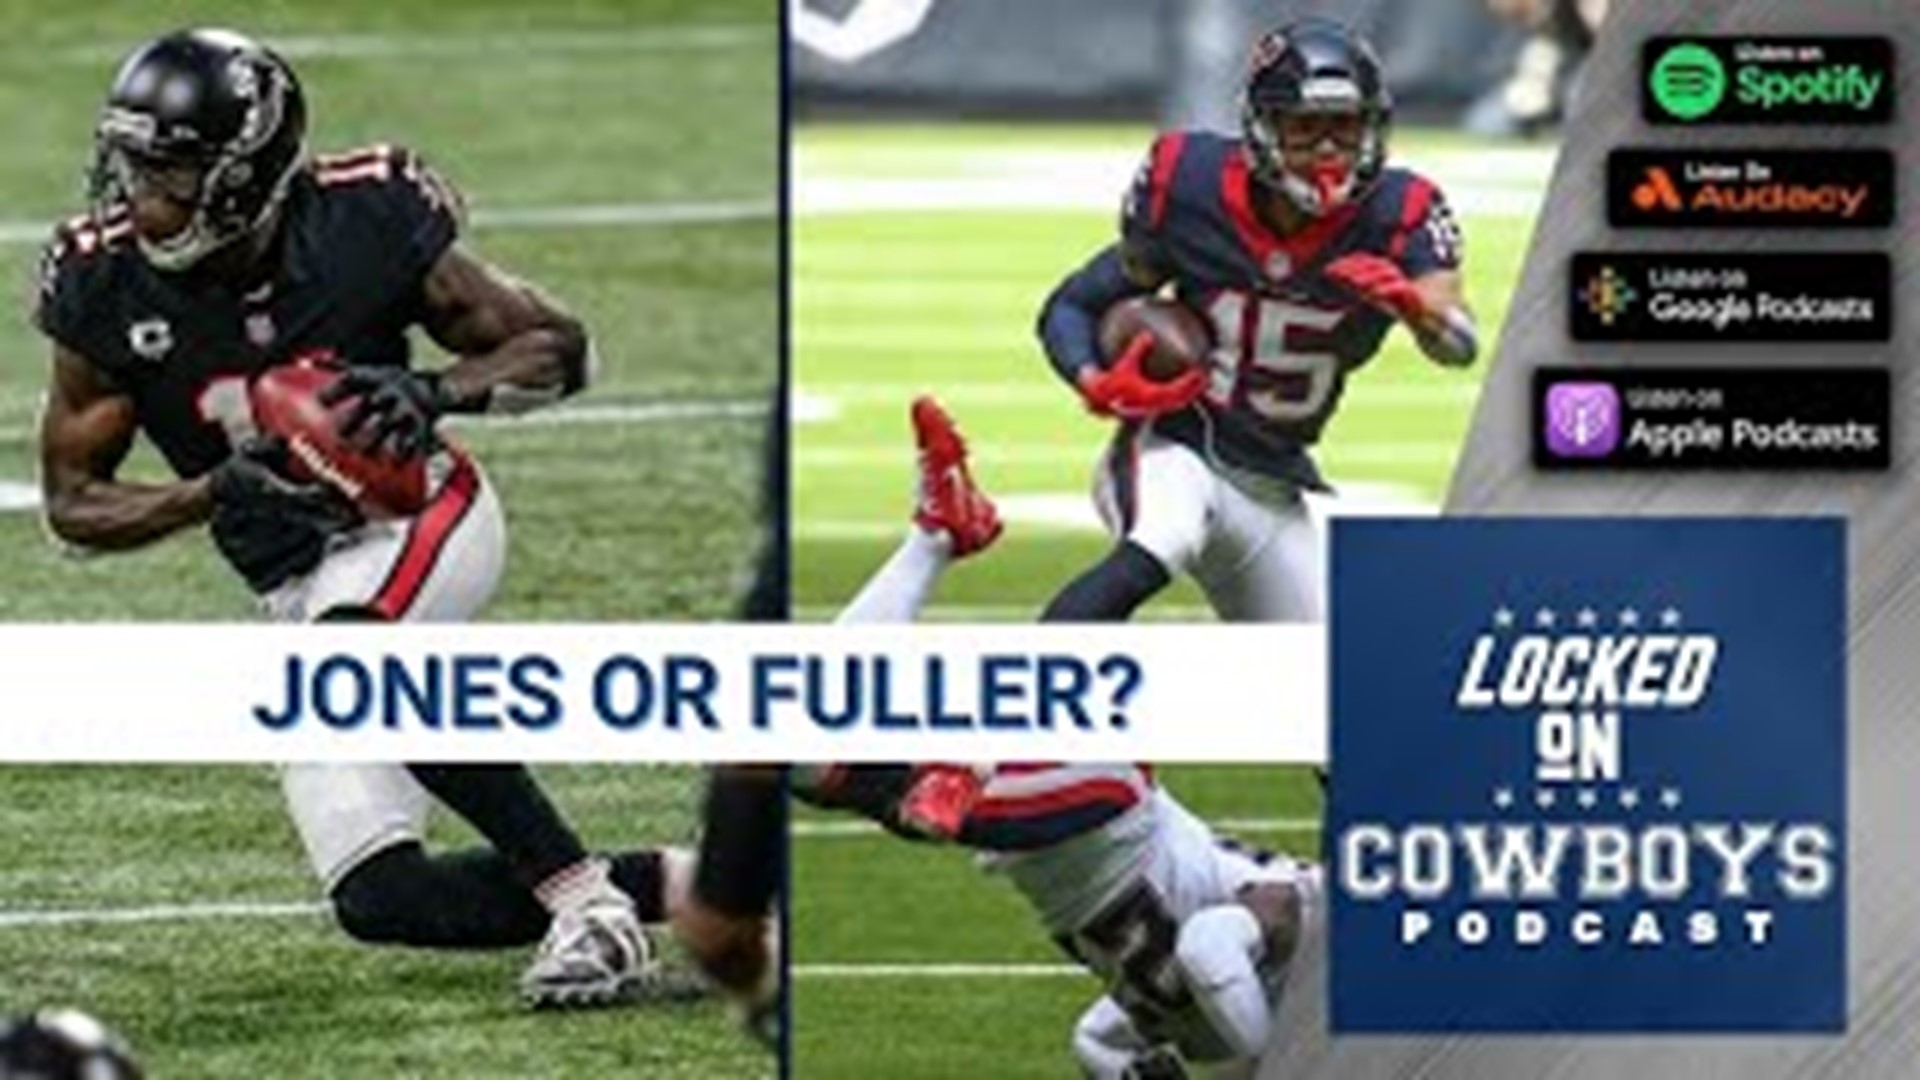 Marcus Mosher and Landon McCool of Locked On Cowboys discuss if the Dallas Cowboys could sign wide receivers Julio Jones or Will Fuller?